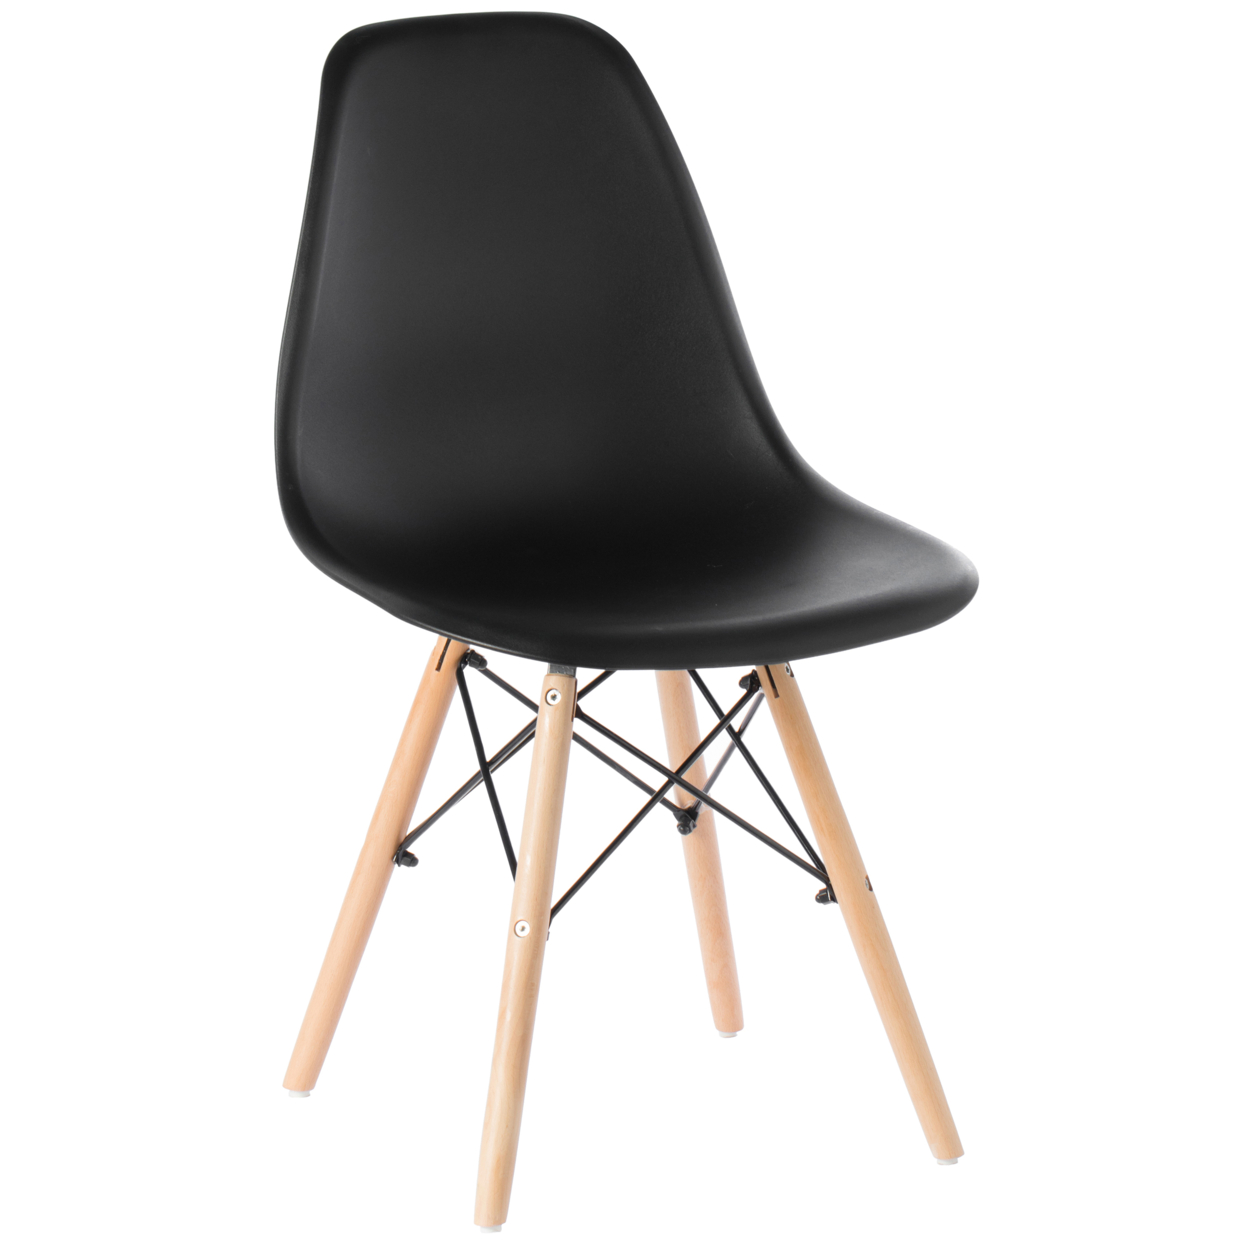 Mid-Century Modern Style Plastic DSW Shell Dining Chair With Solid Beech Wooden Dowel Eiffel Legs - Black